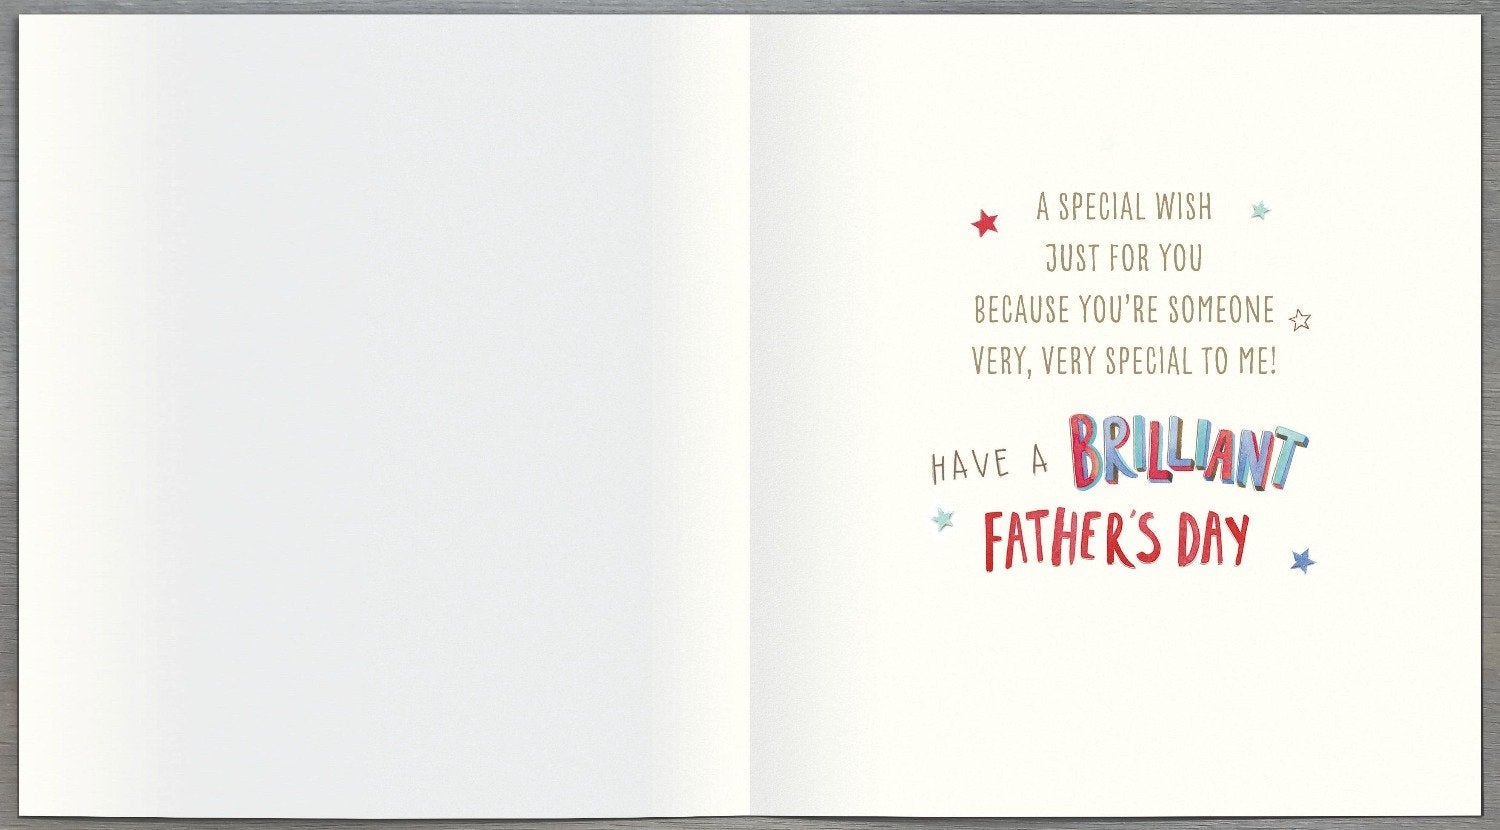 Fathers Day Card - General / Happy Father's Day & Small Brown Teddy